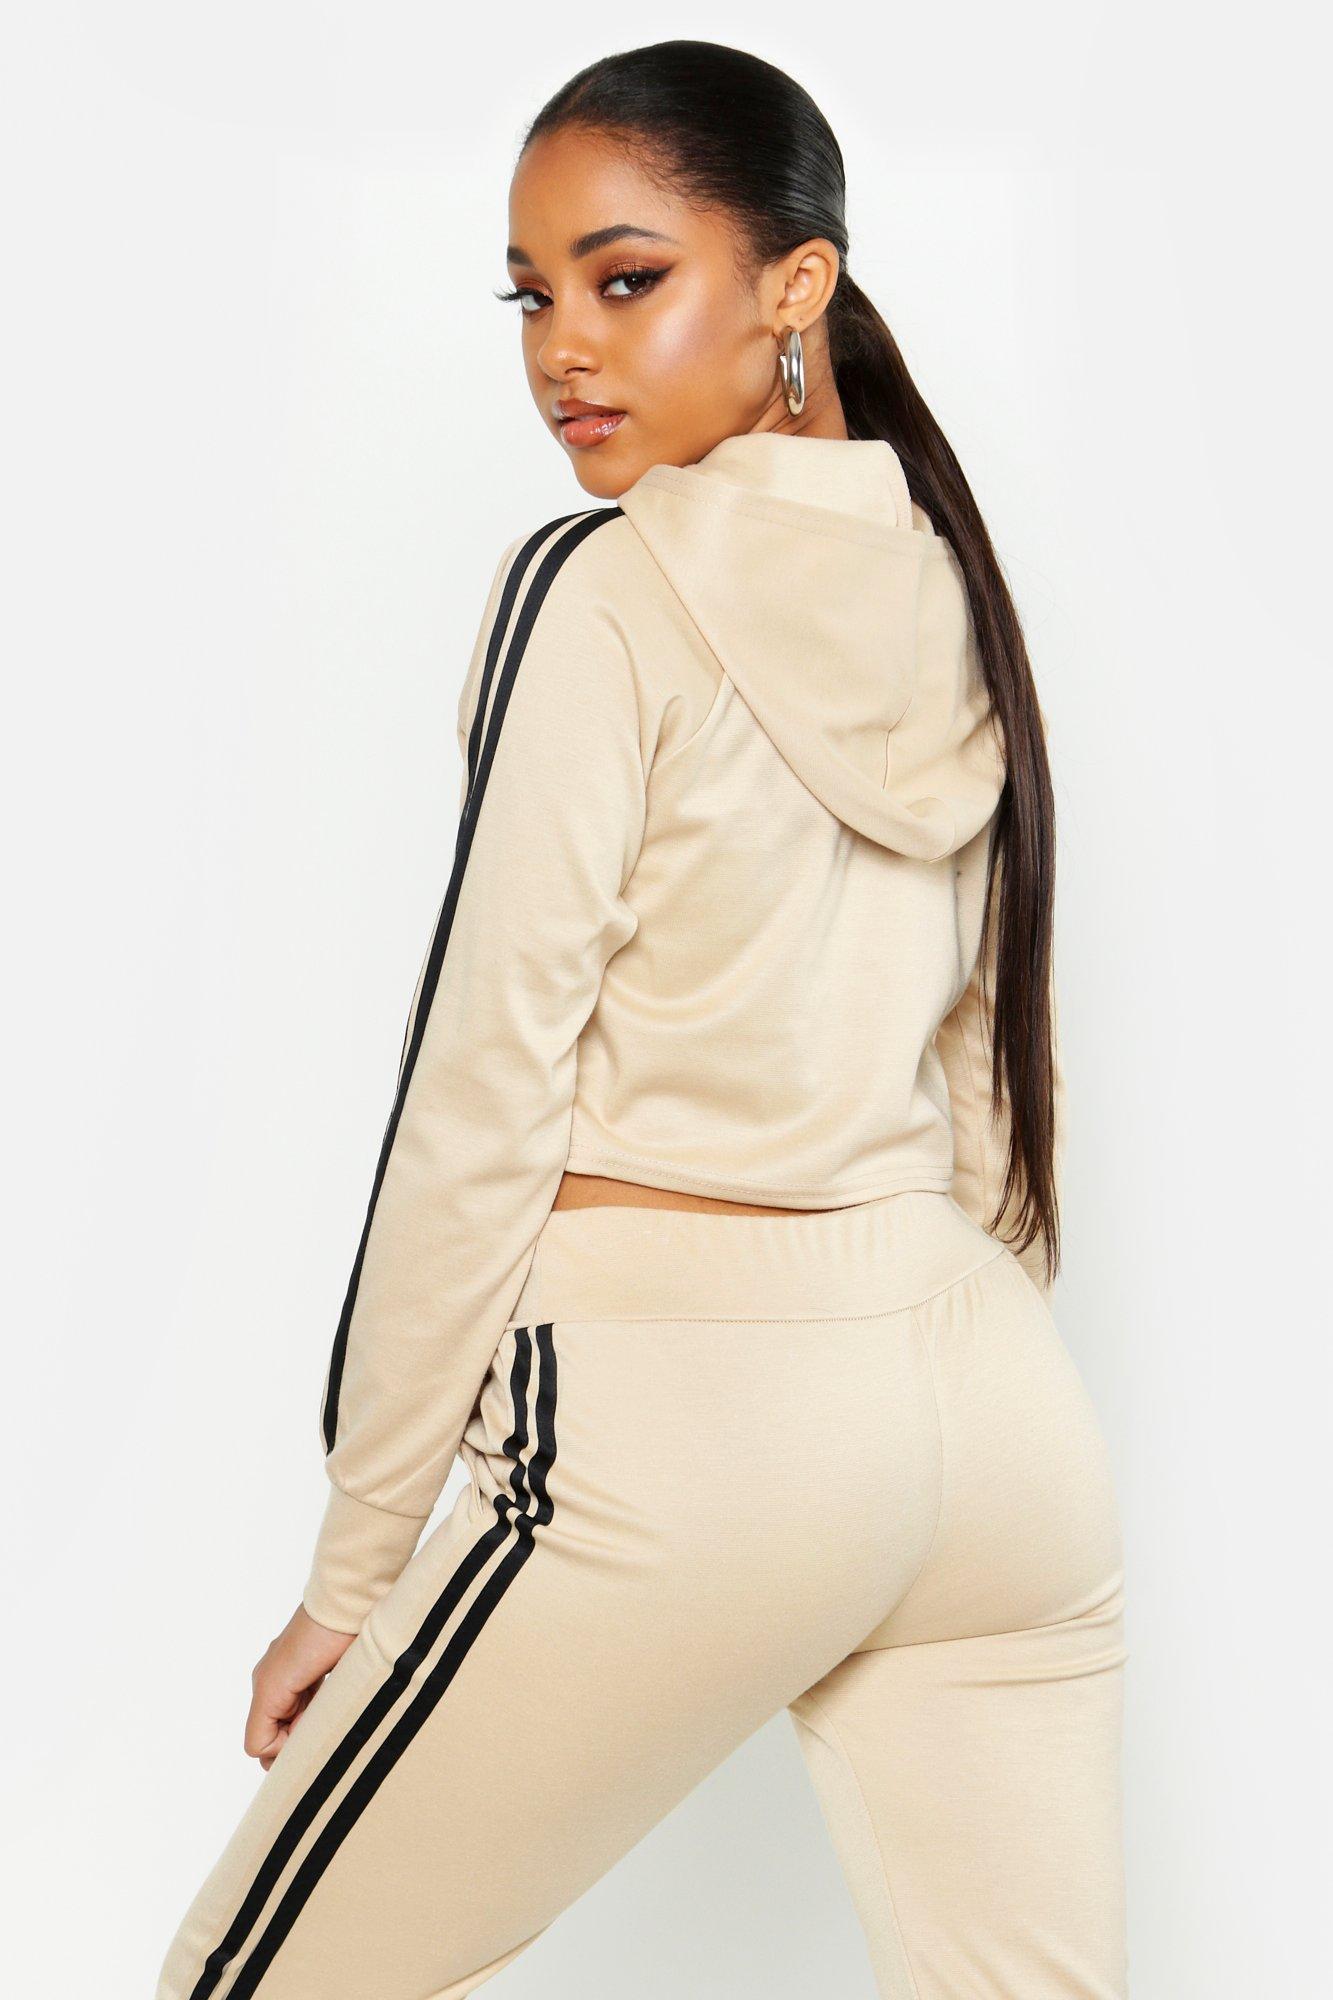 Boohoo Athleisure Sports Stripe Tracksuit in Natural - Lyst